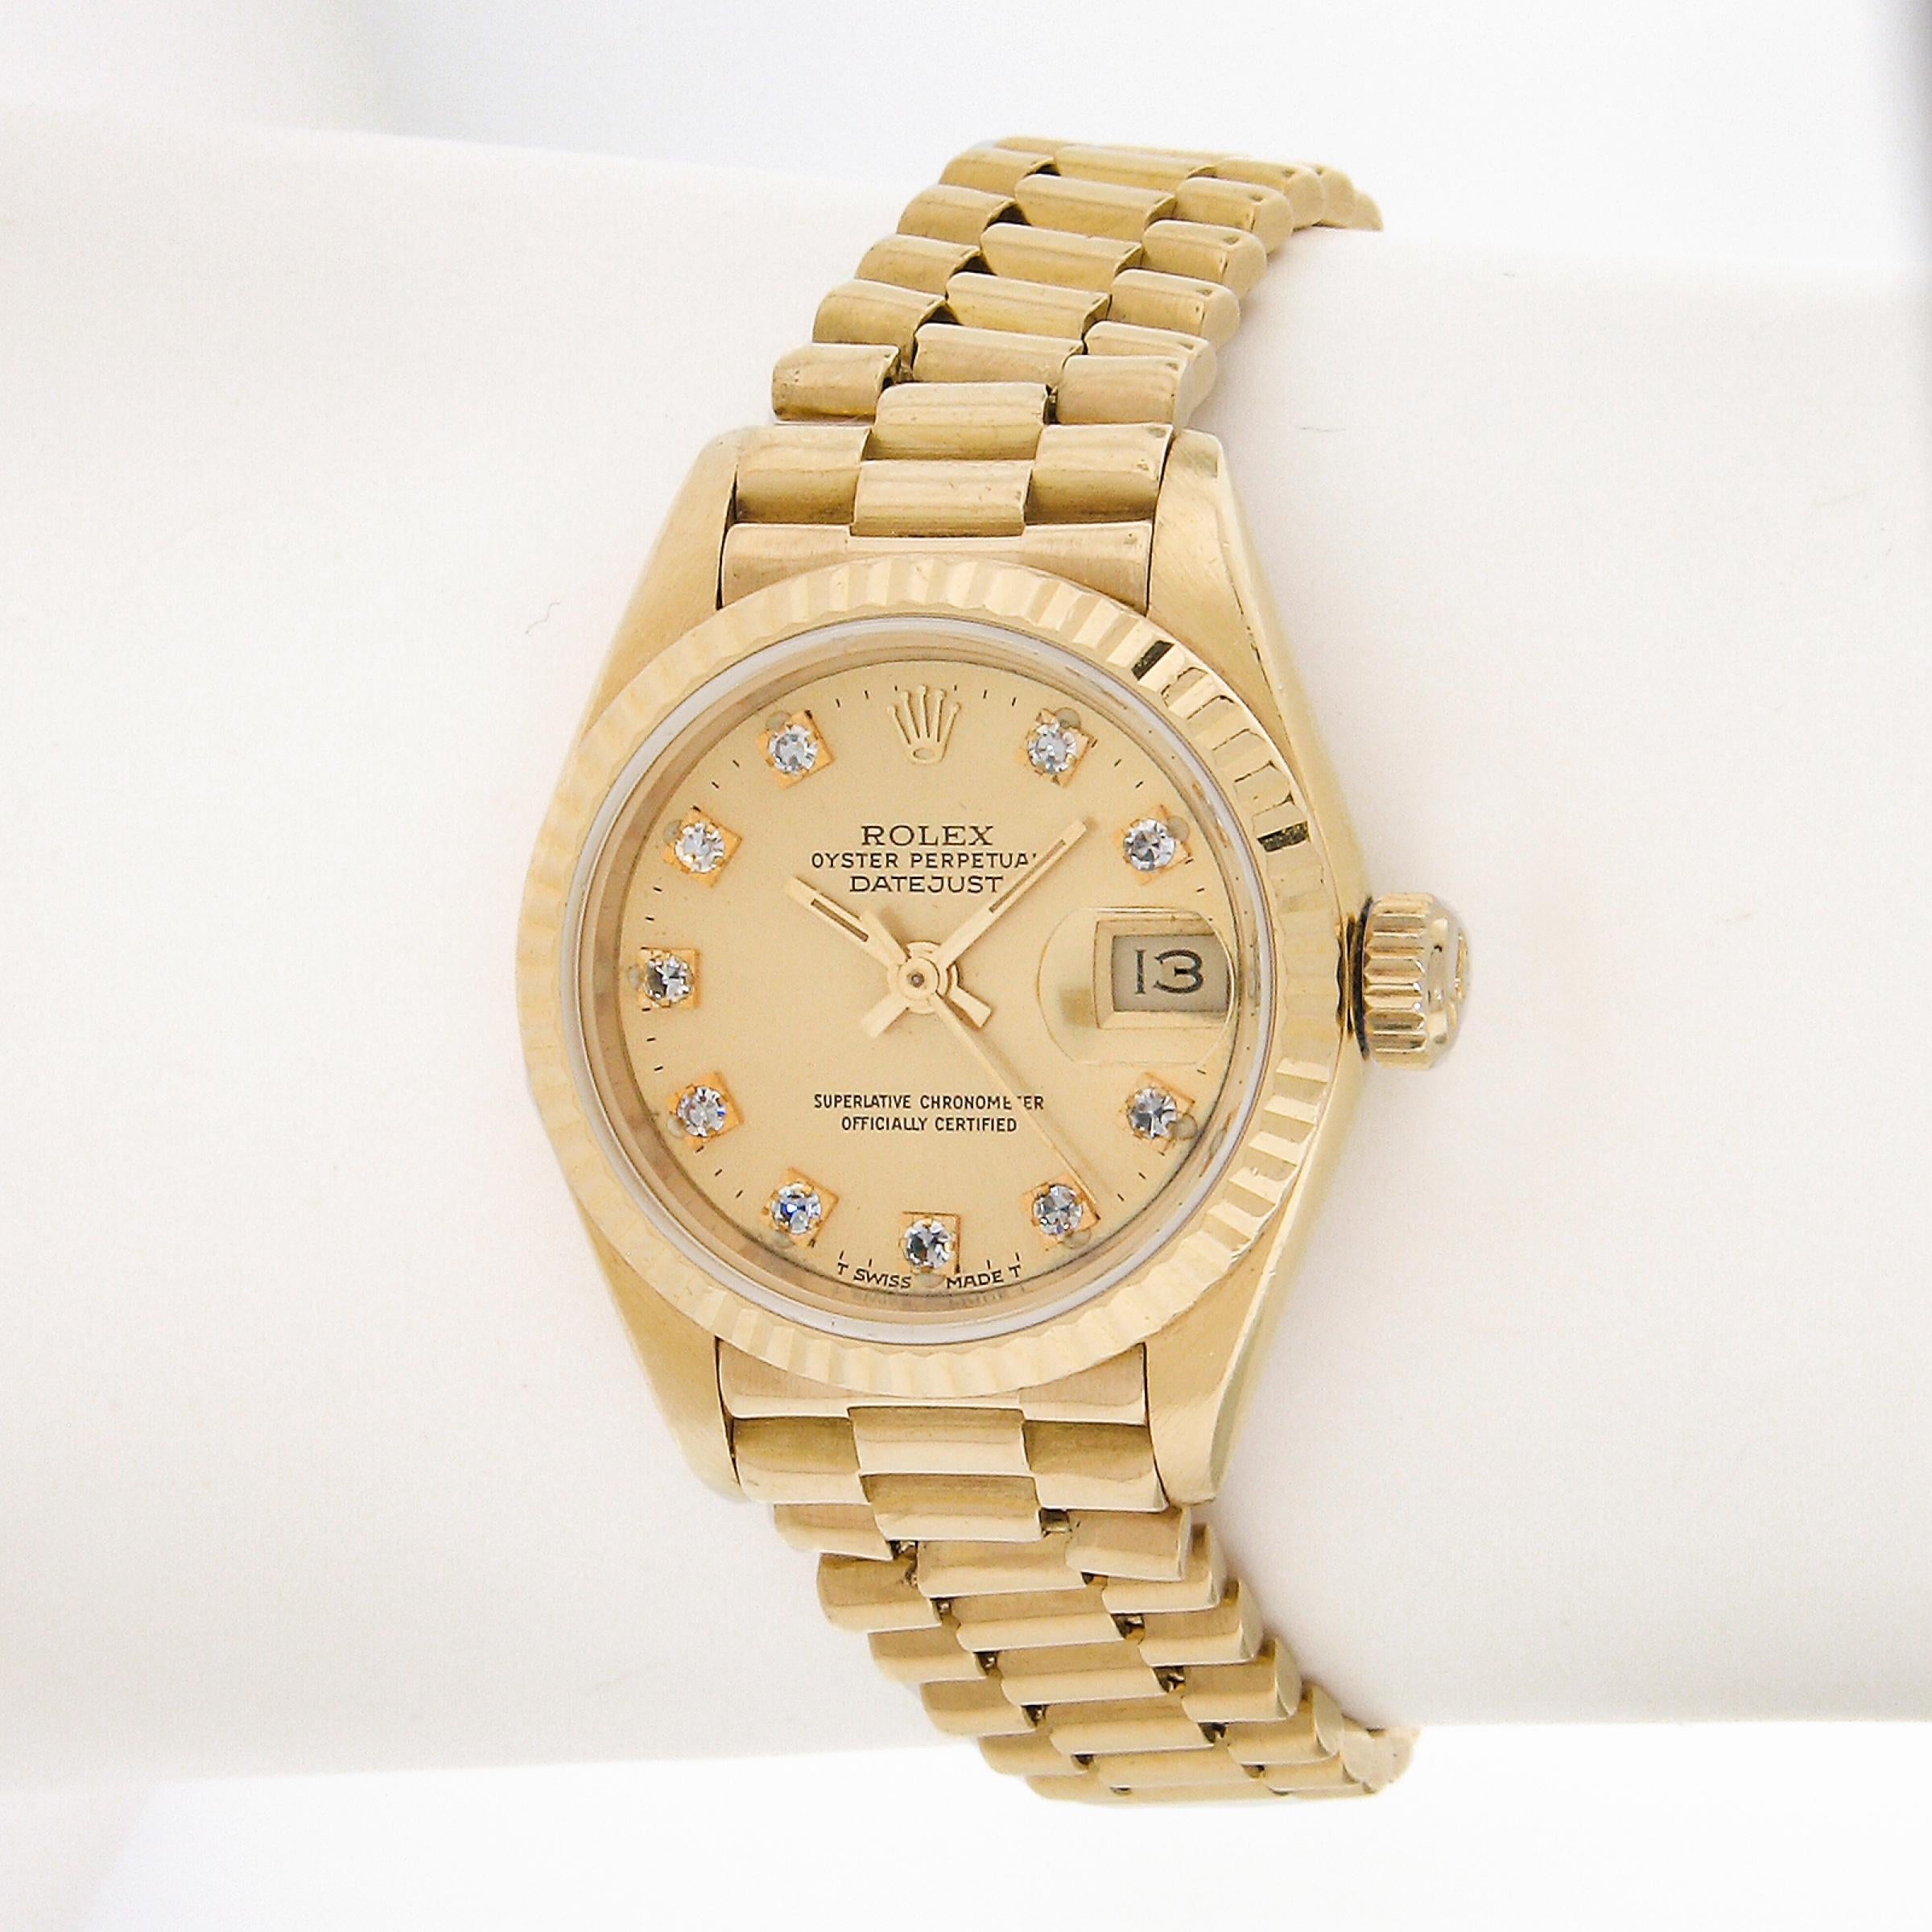 This bold vintage ladies Rolex Date-just is from 1990 and reference 69178. The automatic self-winding movement runs smoothly and keeps accurate time. The watch remains in excellent overall condition despite some light visible scratches that consist